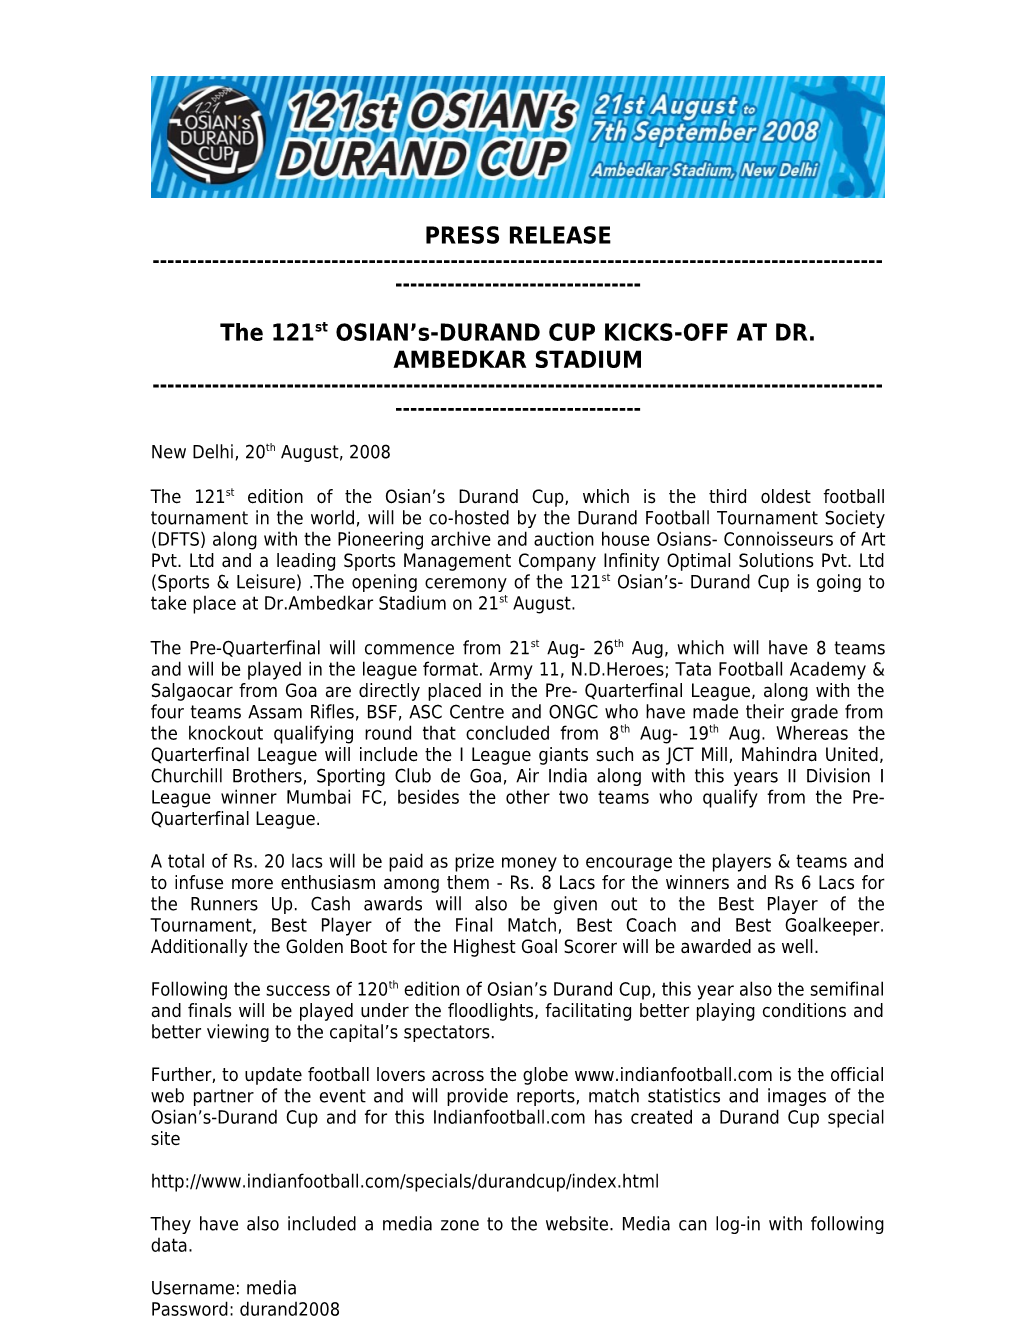 The Third Oldest Football Tournament in the World, the Durand Cup Which Was Earlier Conducted